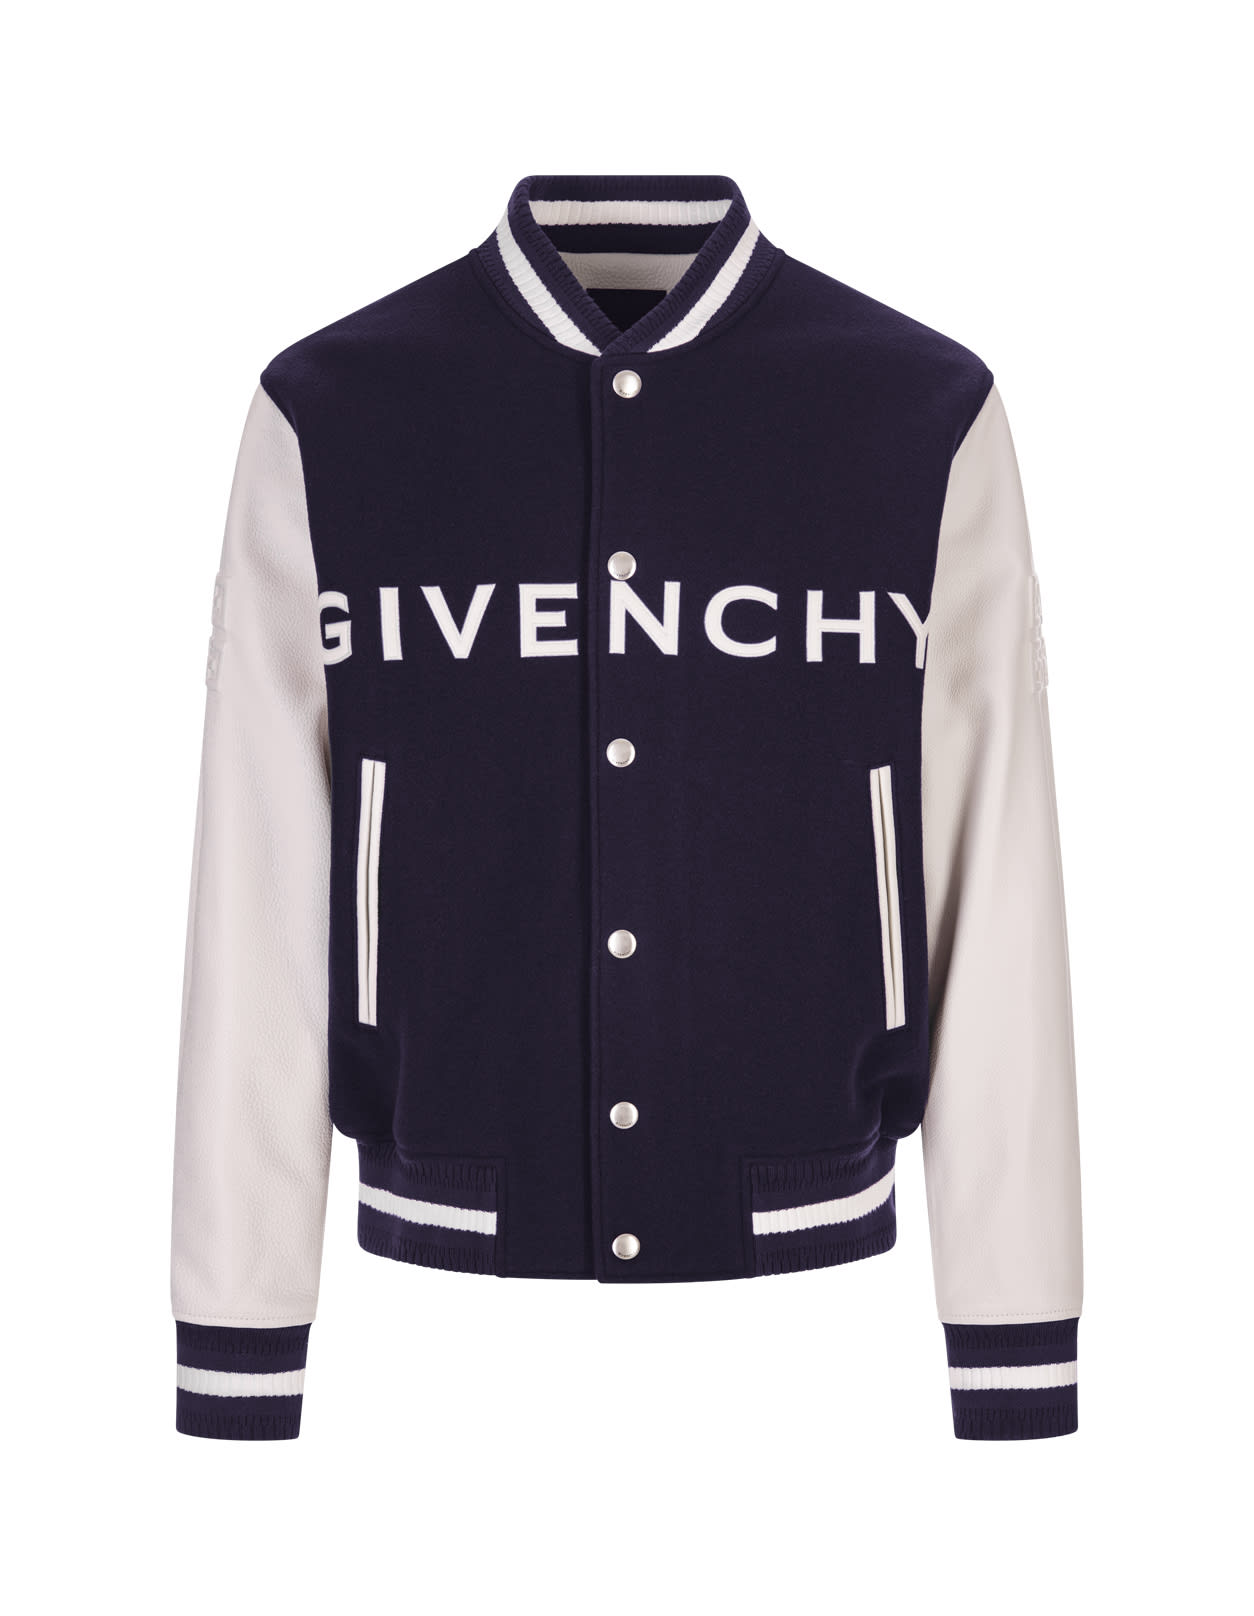 GIVENCHY NAVY BLUE AND WHITE GIVENCHY BOMBER JACKET IN WOOL AND LEATHER